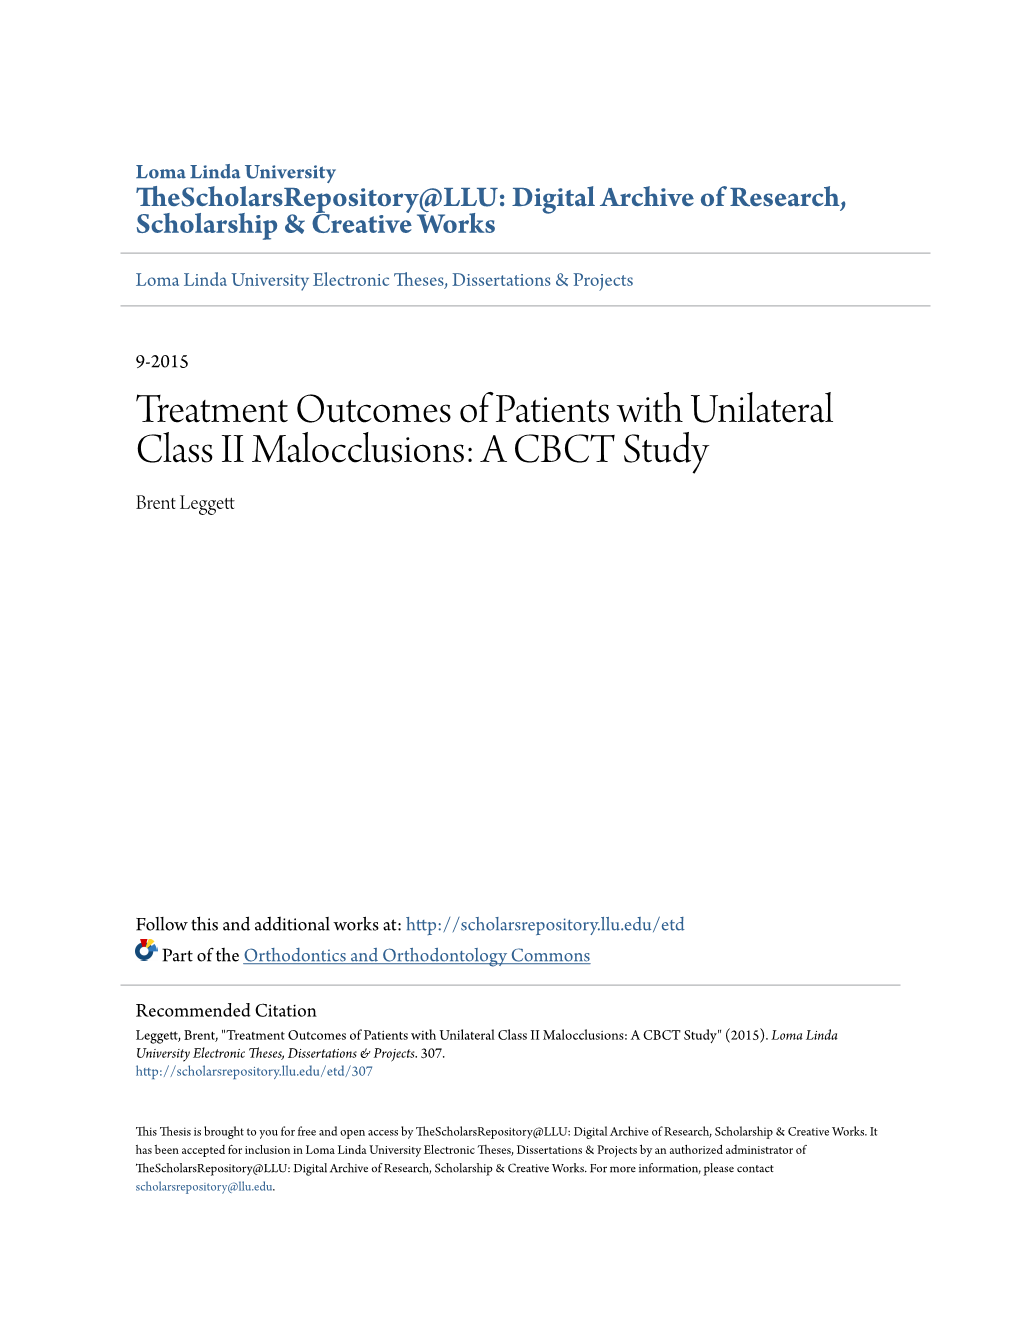 Treatment Outcomes of Patients with Unilateral Class II Malocclusions: a CBCT Study Brent Leggett